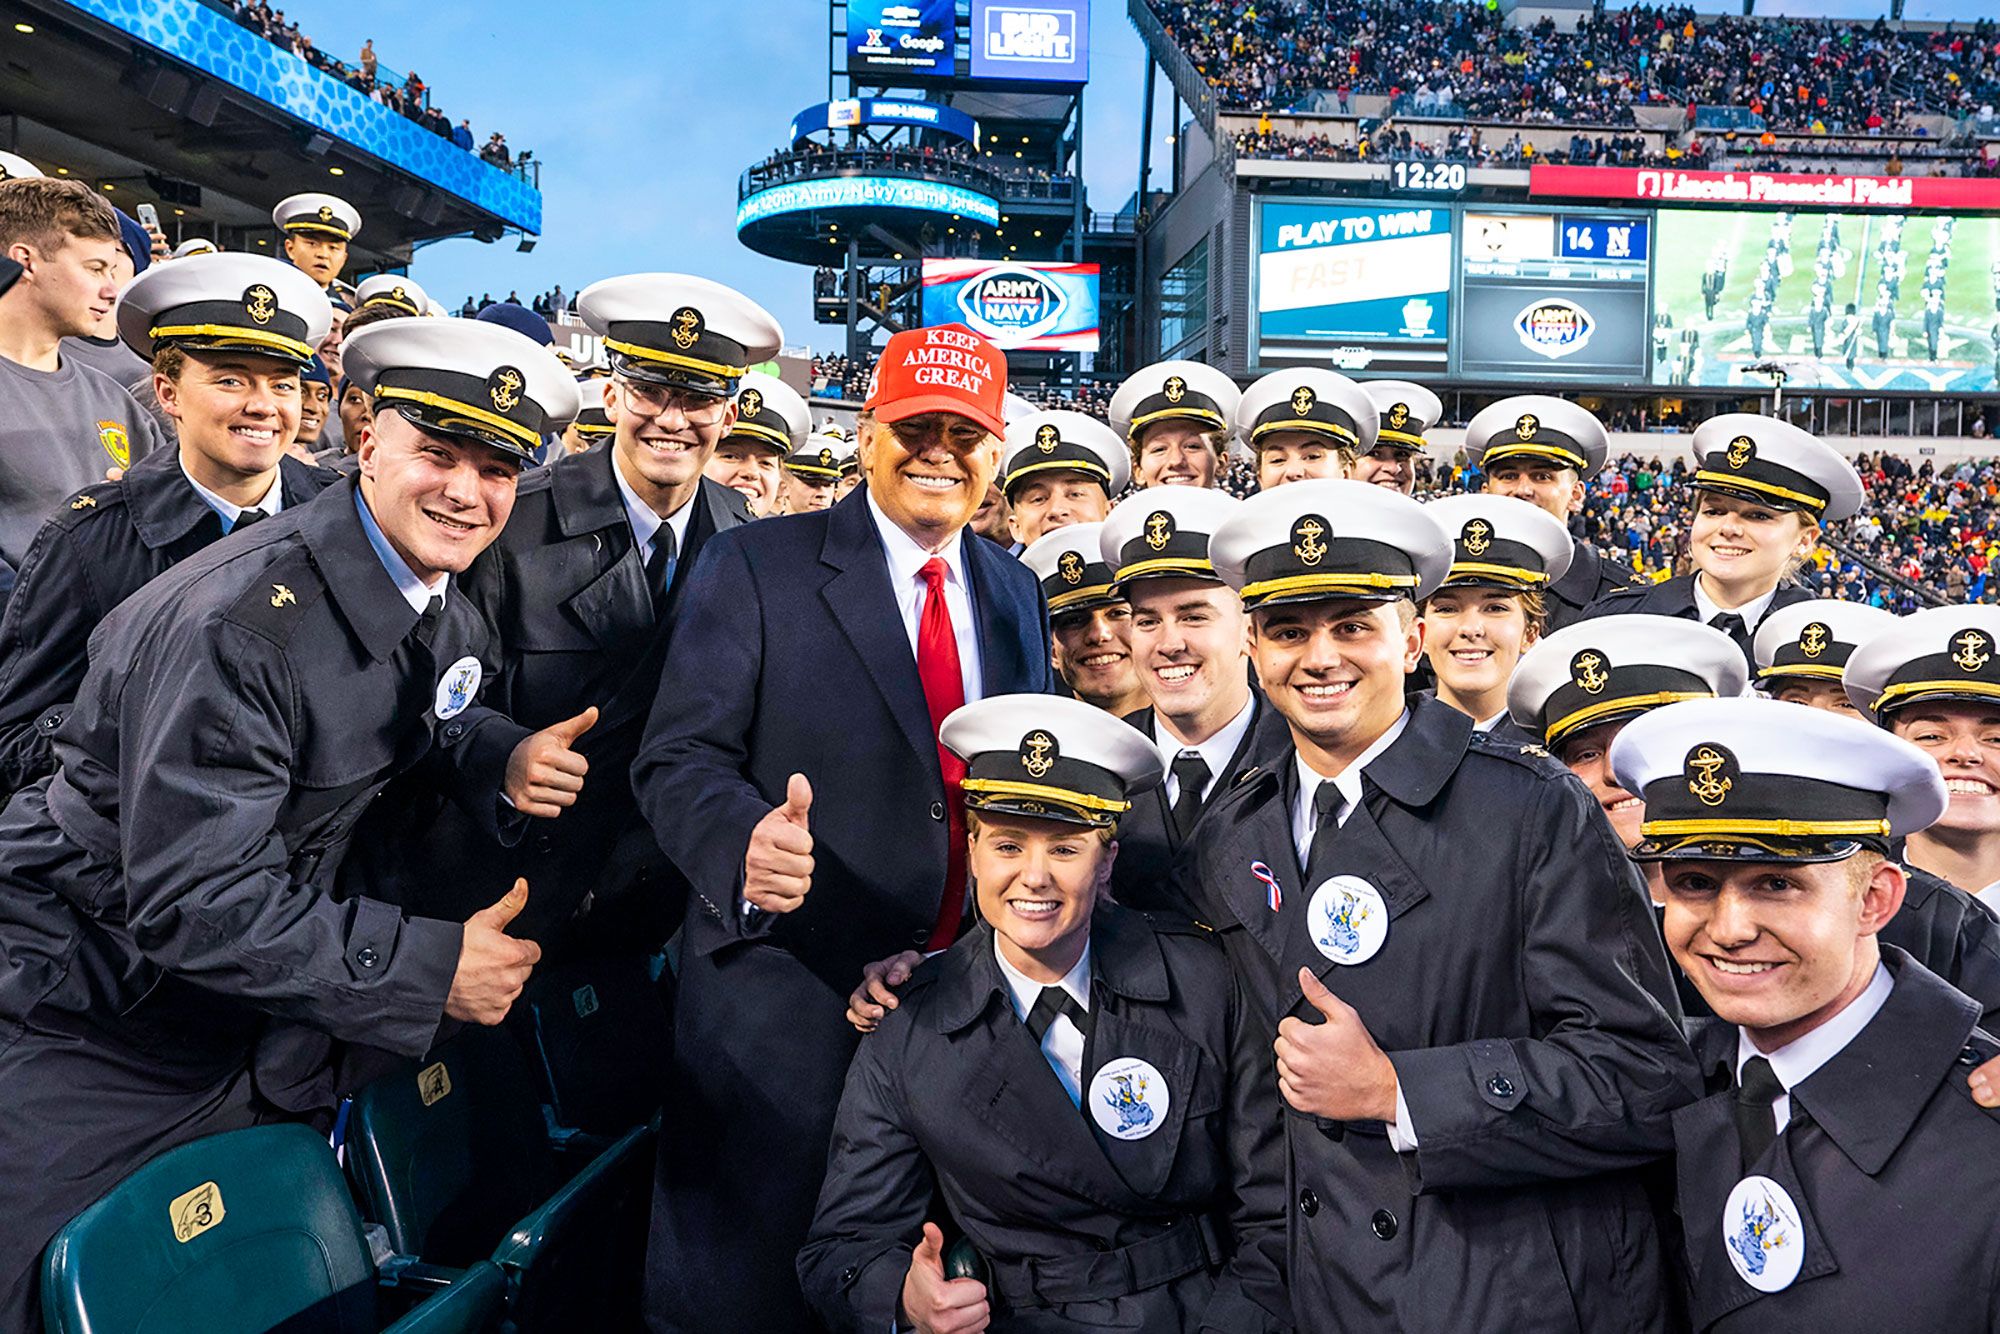 President Donald J. Trump visits with U.S. Navy Cadets during the 120th Army-Navy football game at Lincoln Financial Field in Philadelphia, Pa.